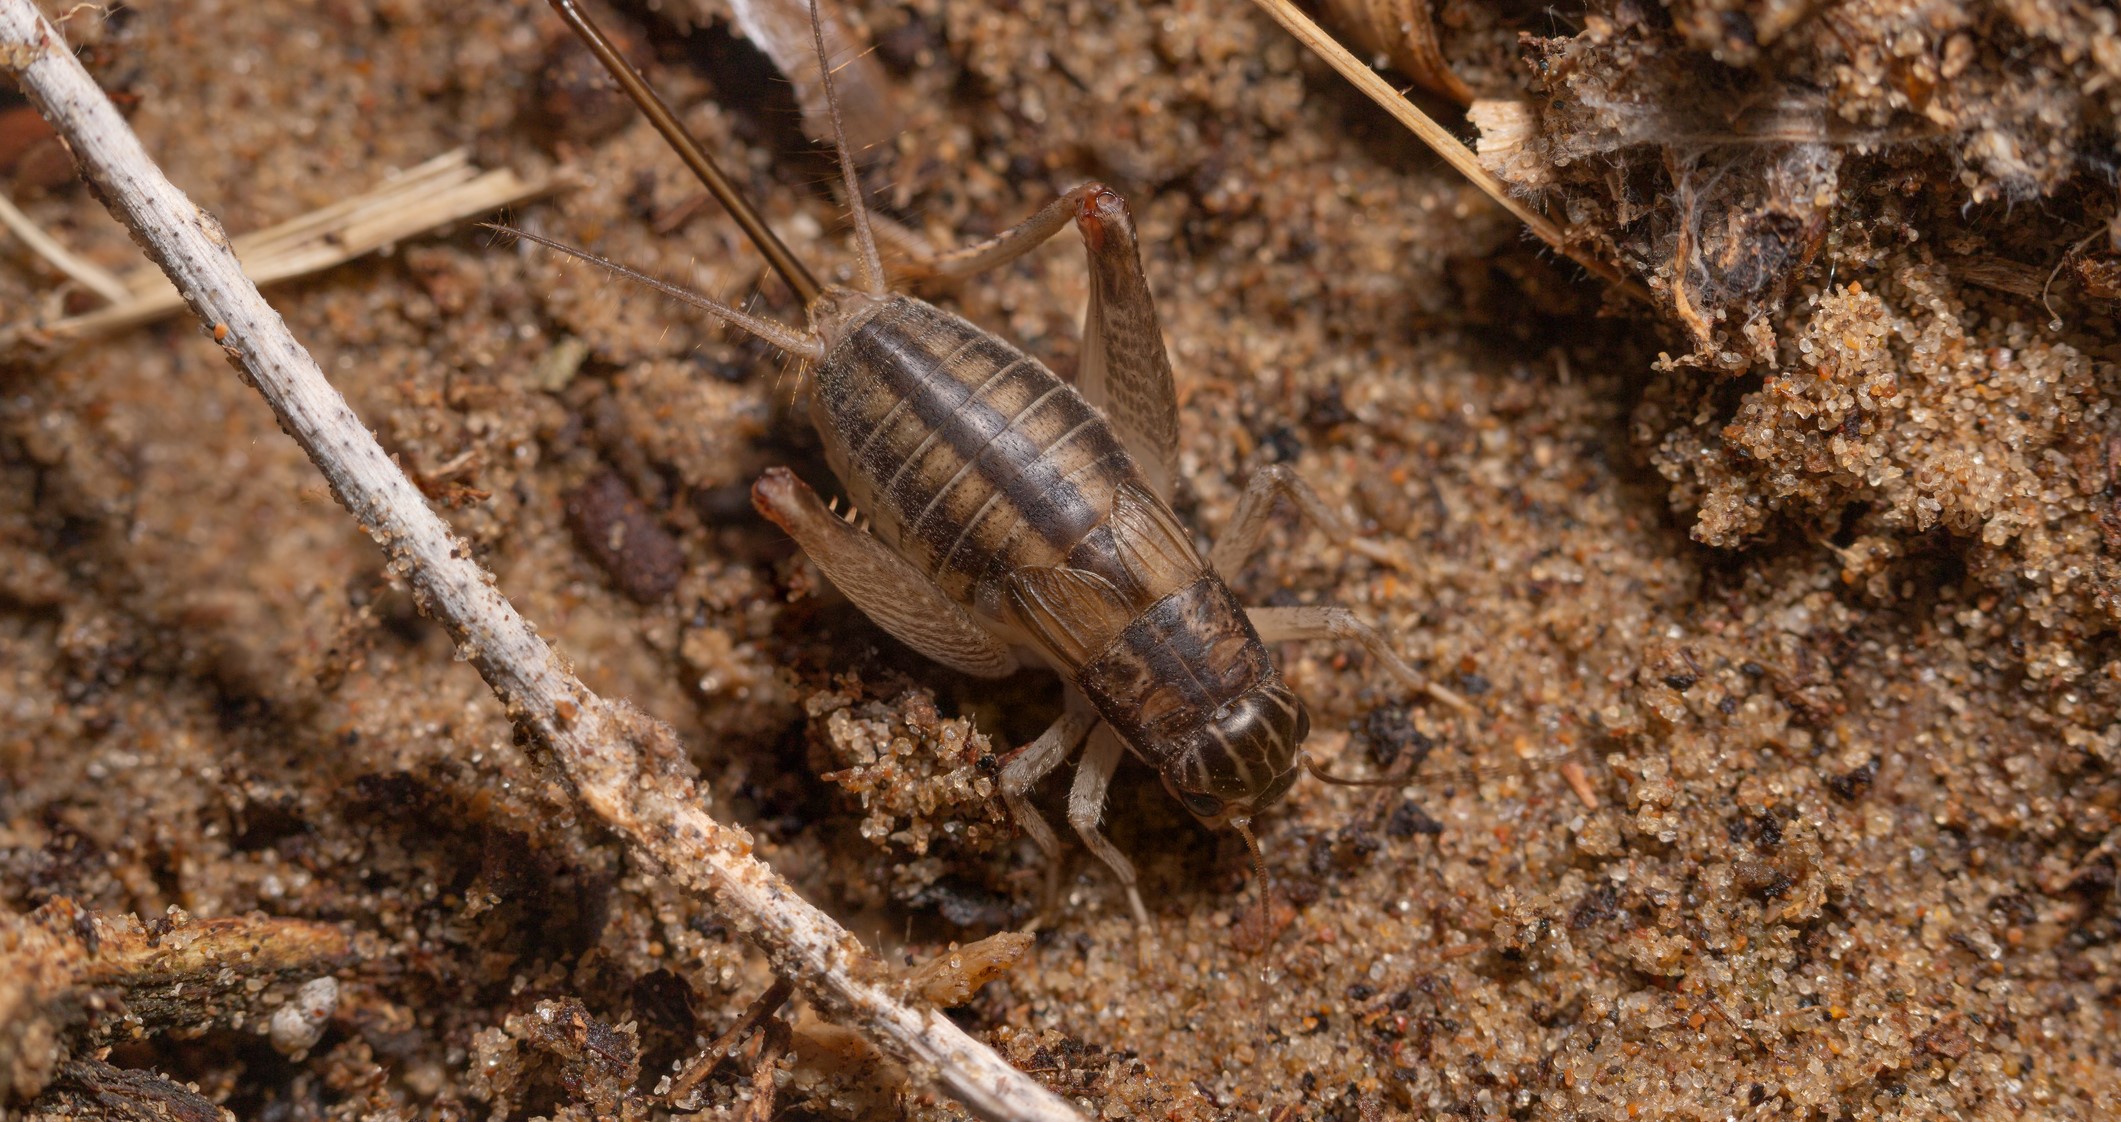 A cricket in the sand